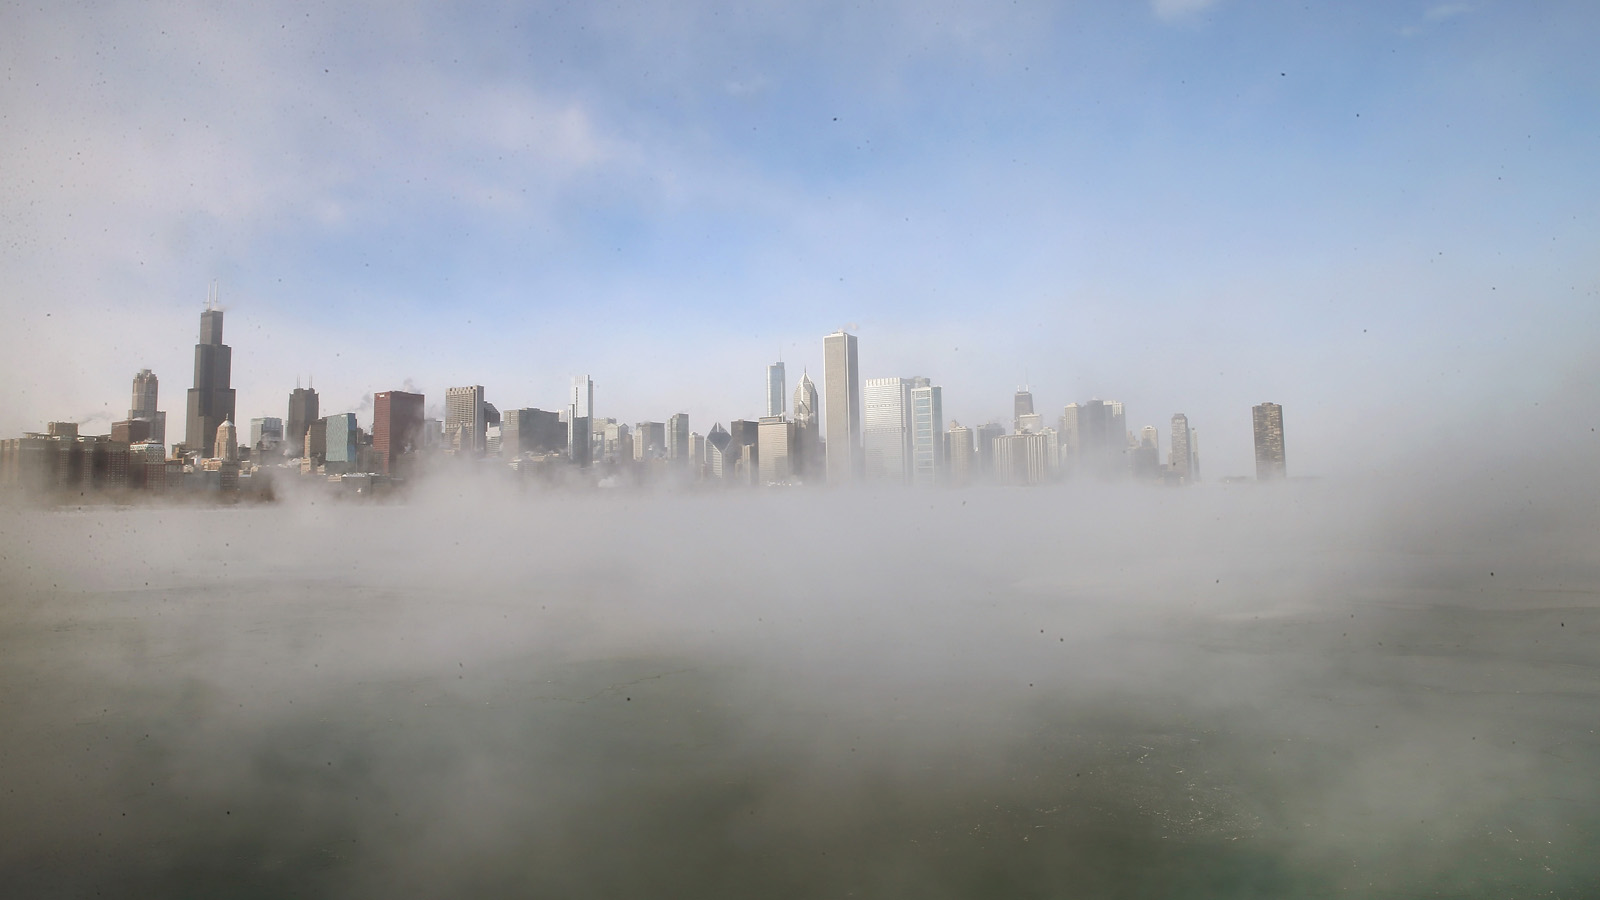 21 Pictures Of Chicago’s Modern-Day Ice Age